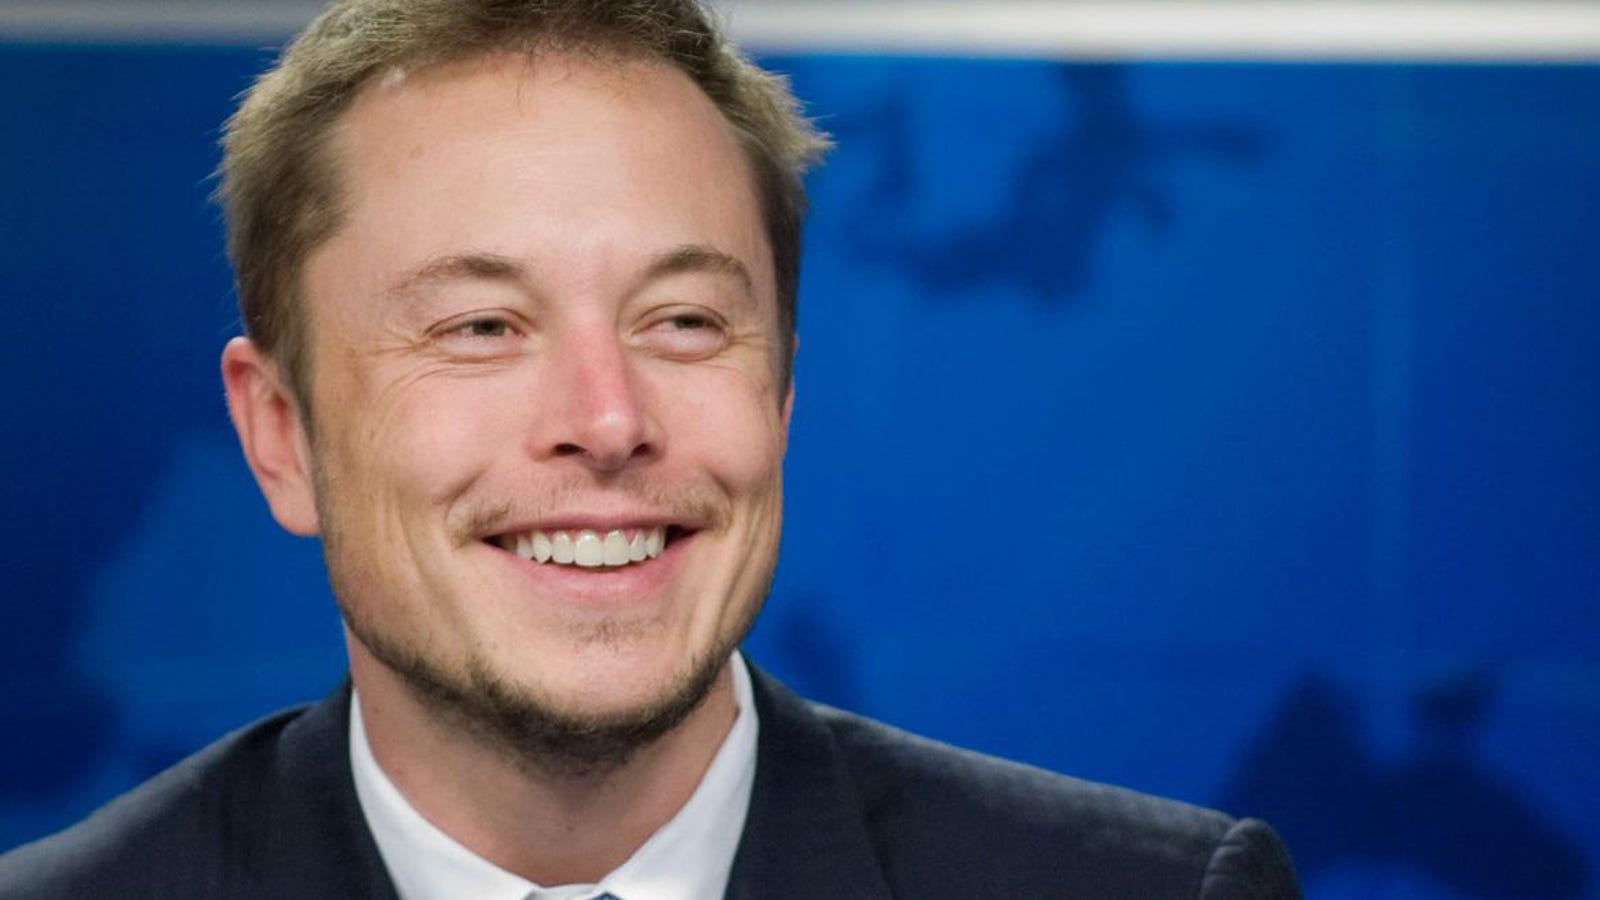 Elon Musk's Quotes From His Rolling Stone Profile Are...Uh...Dark